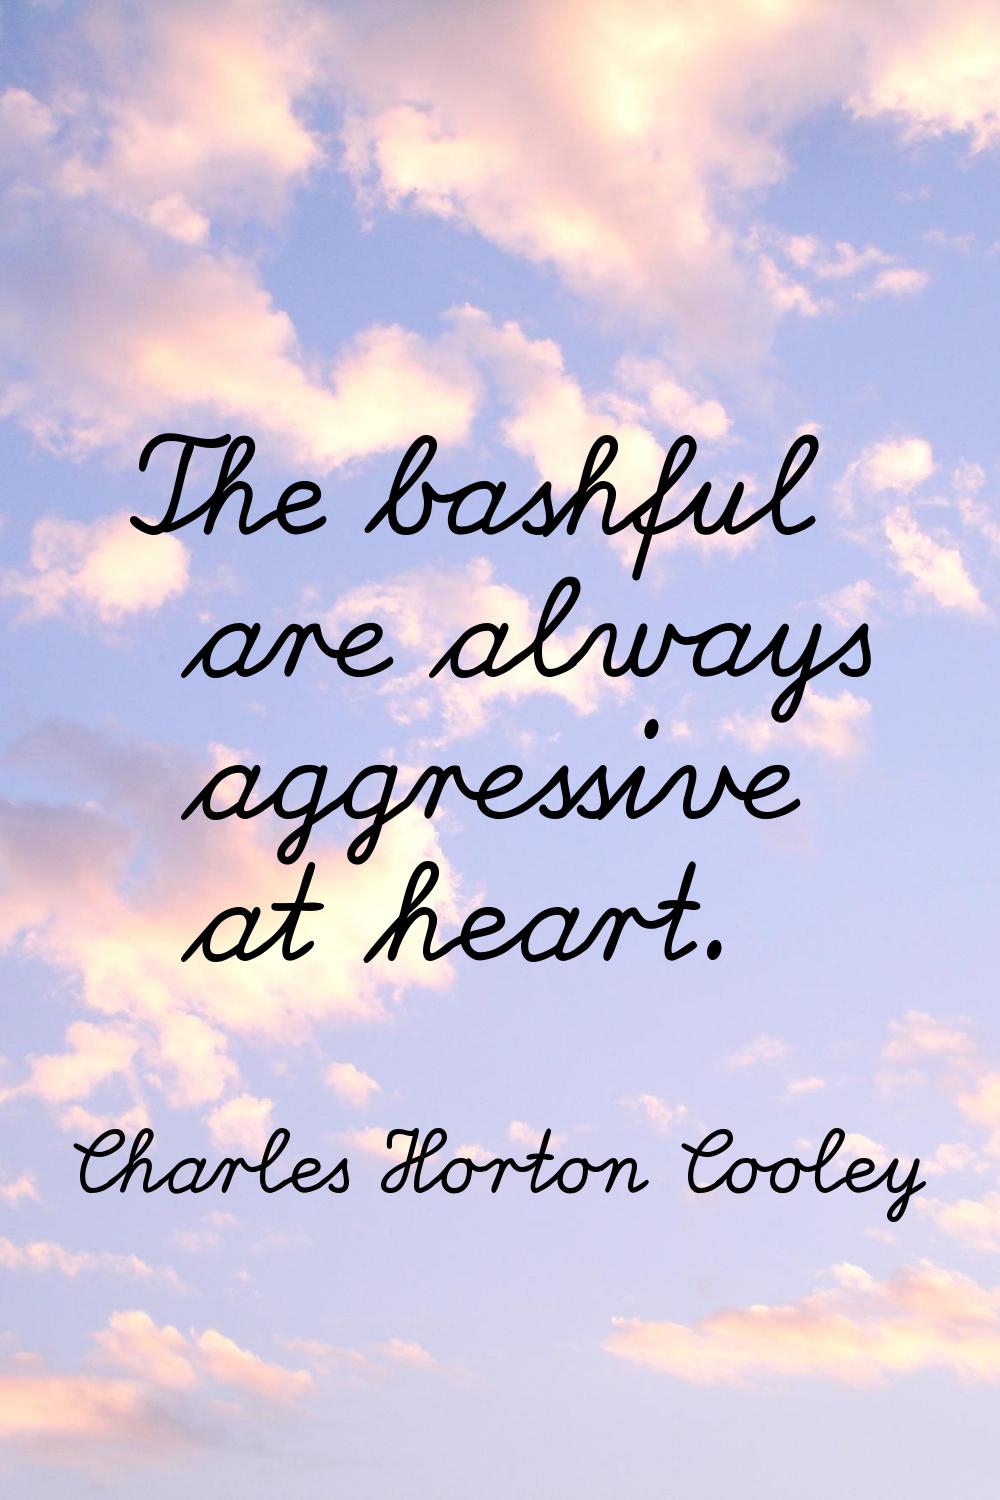 The bashful are always aggressive at heart.